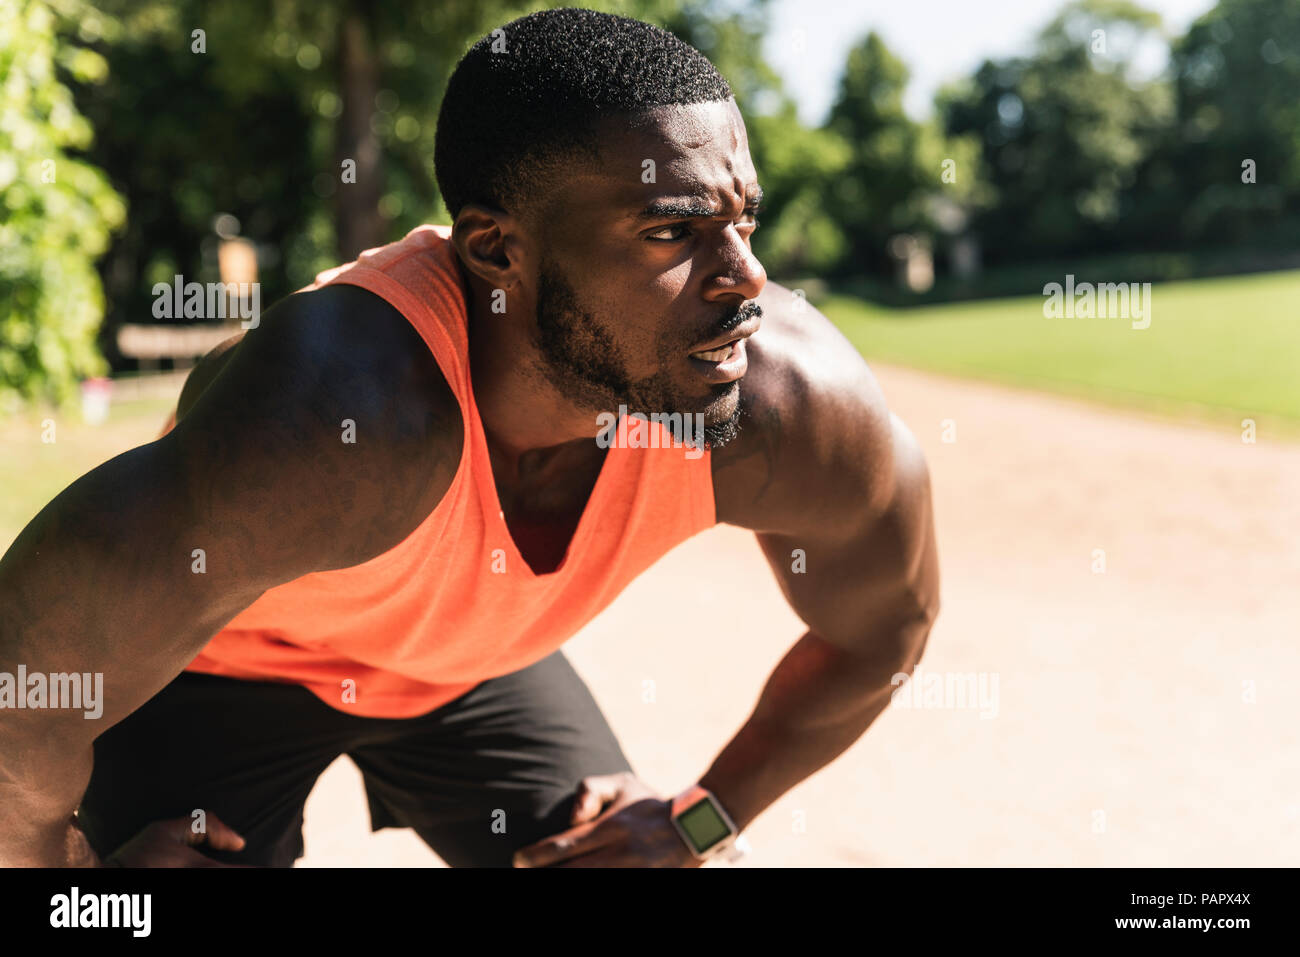 Young athlete exercising on sports field, concentrating Stock Photo